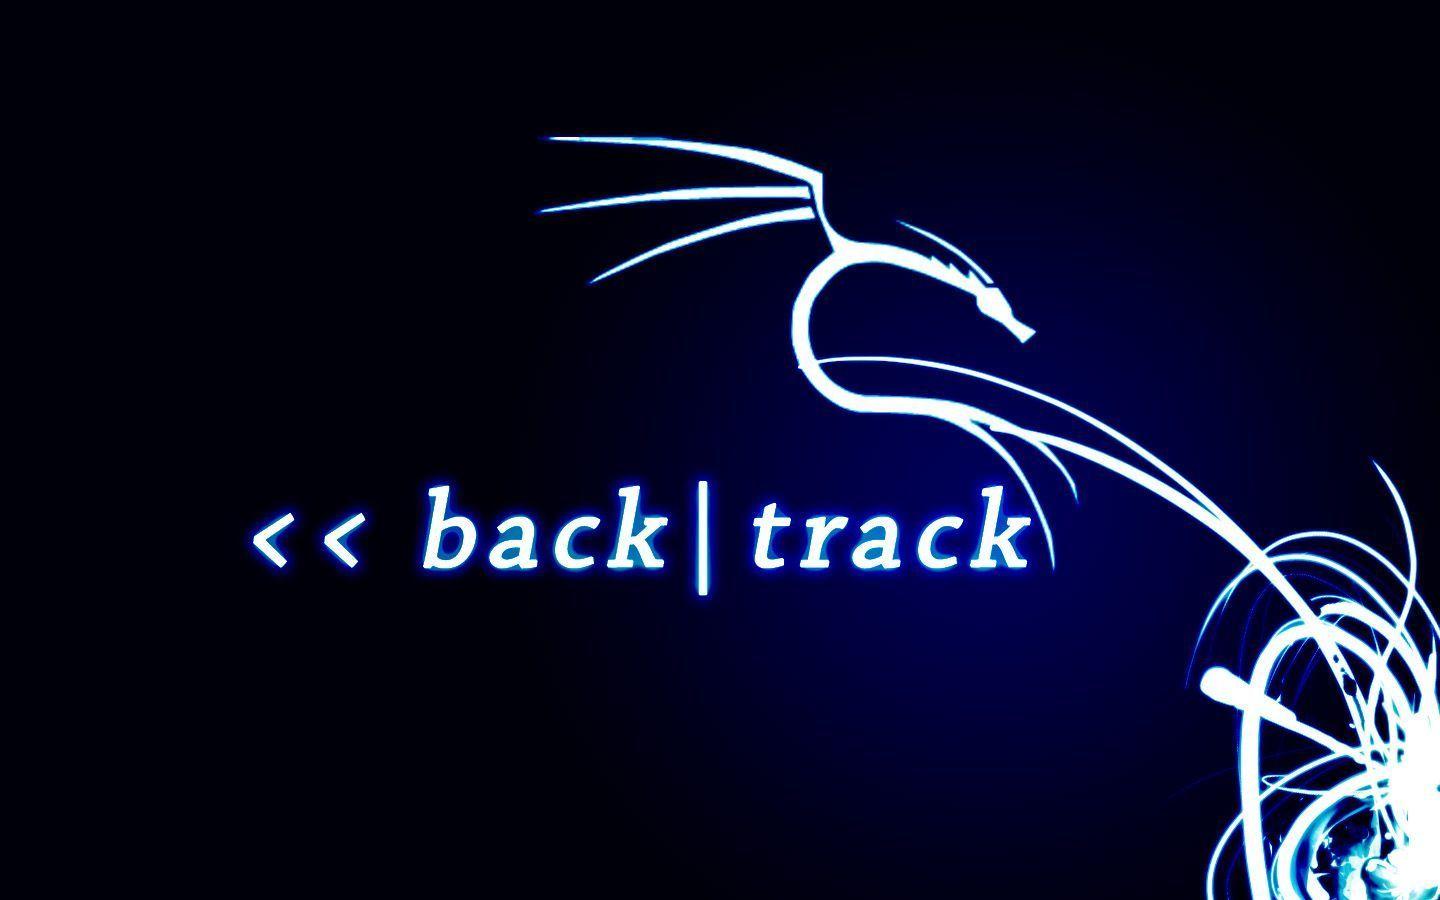 Linux image Backtrack Wallpaper HD wallpaper and background photo